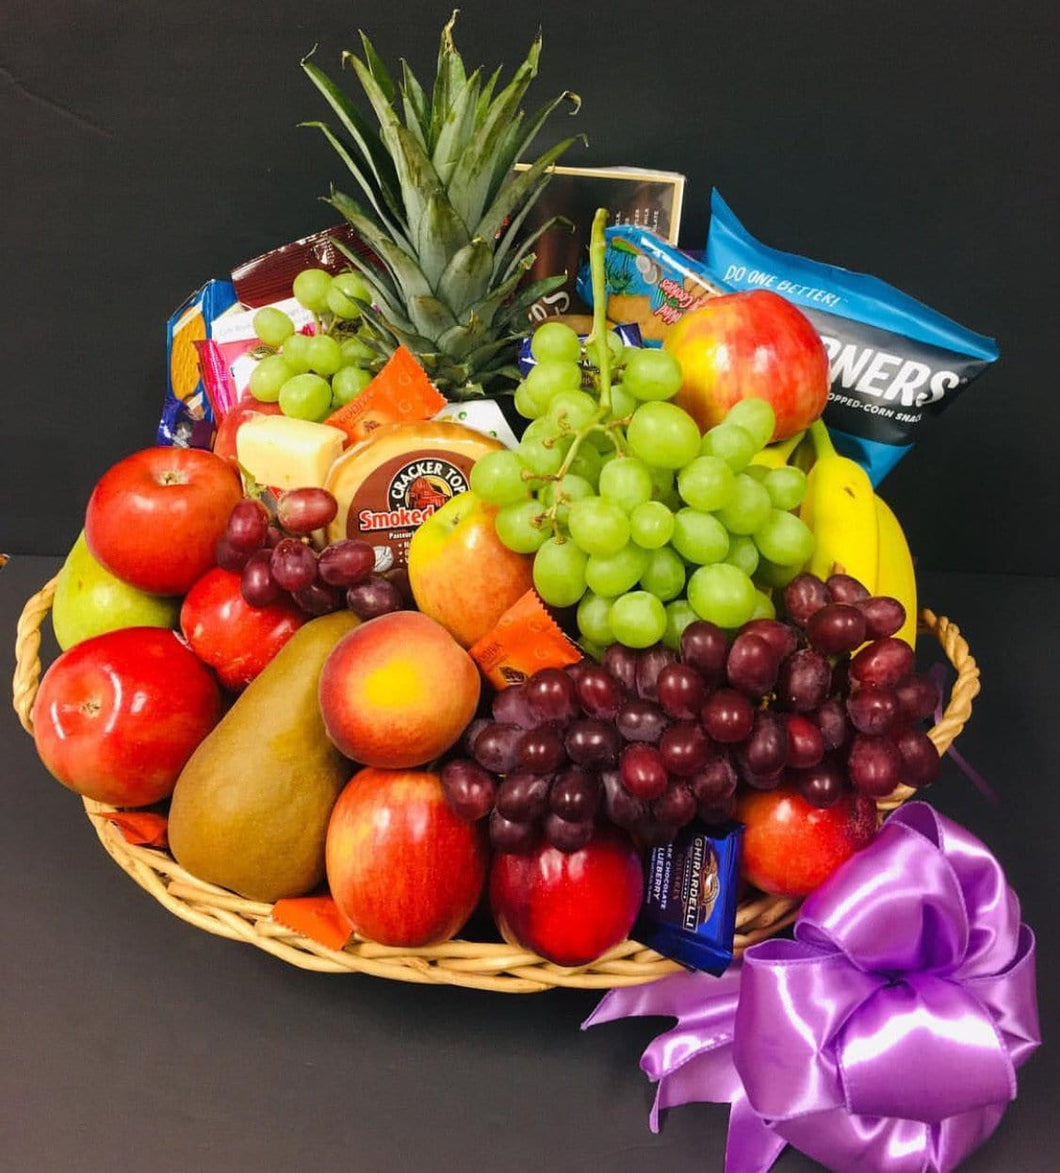 Deluxe Fruit - Gift Baskets By Design SB, Inc.